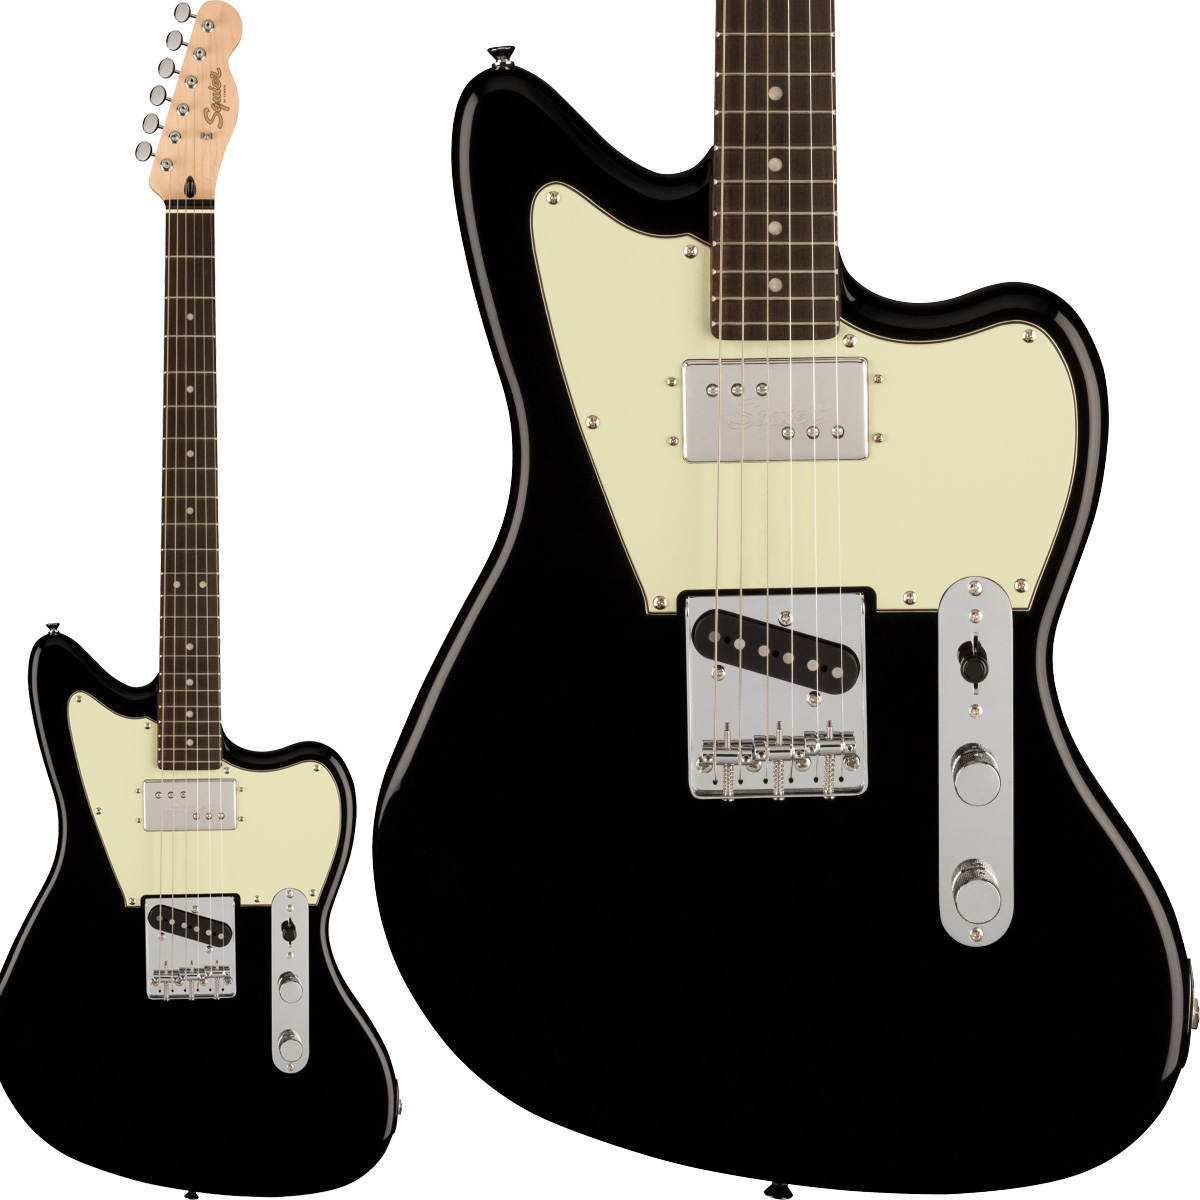 Squier by Fender Telecaster ブラック エレキギター - エレキギター